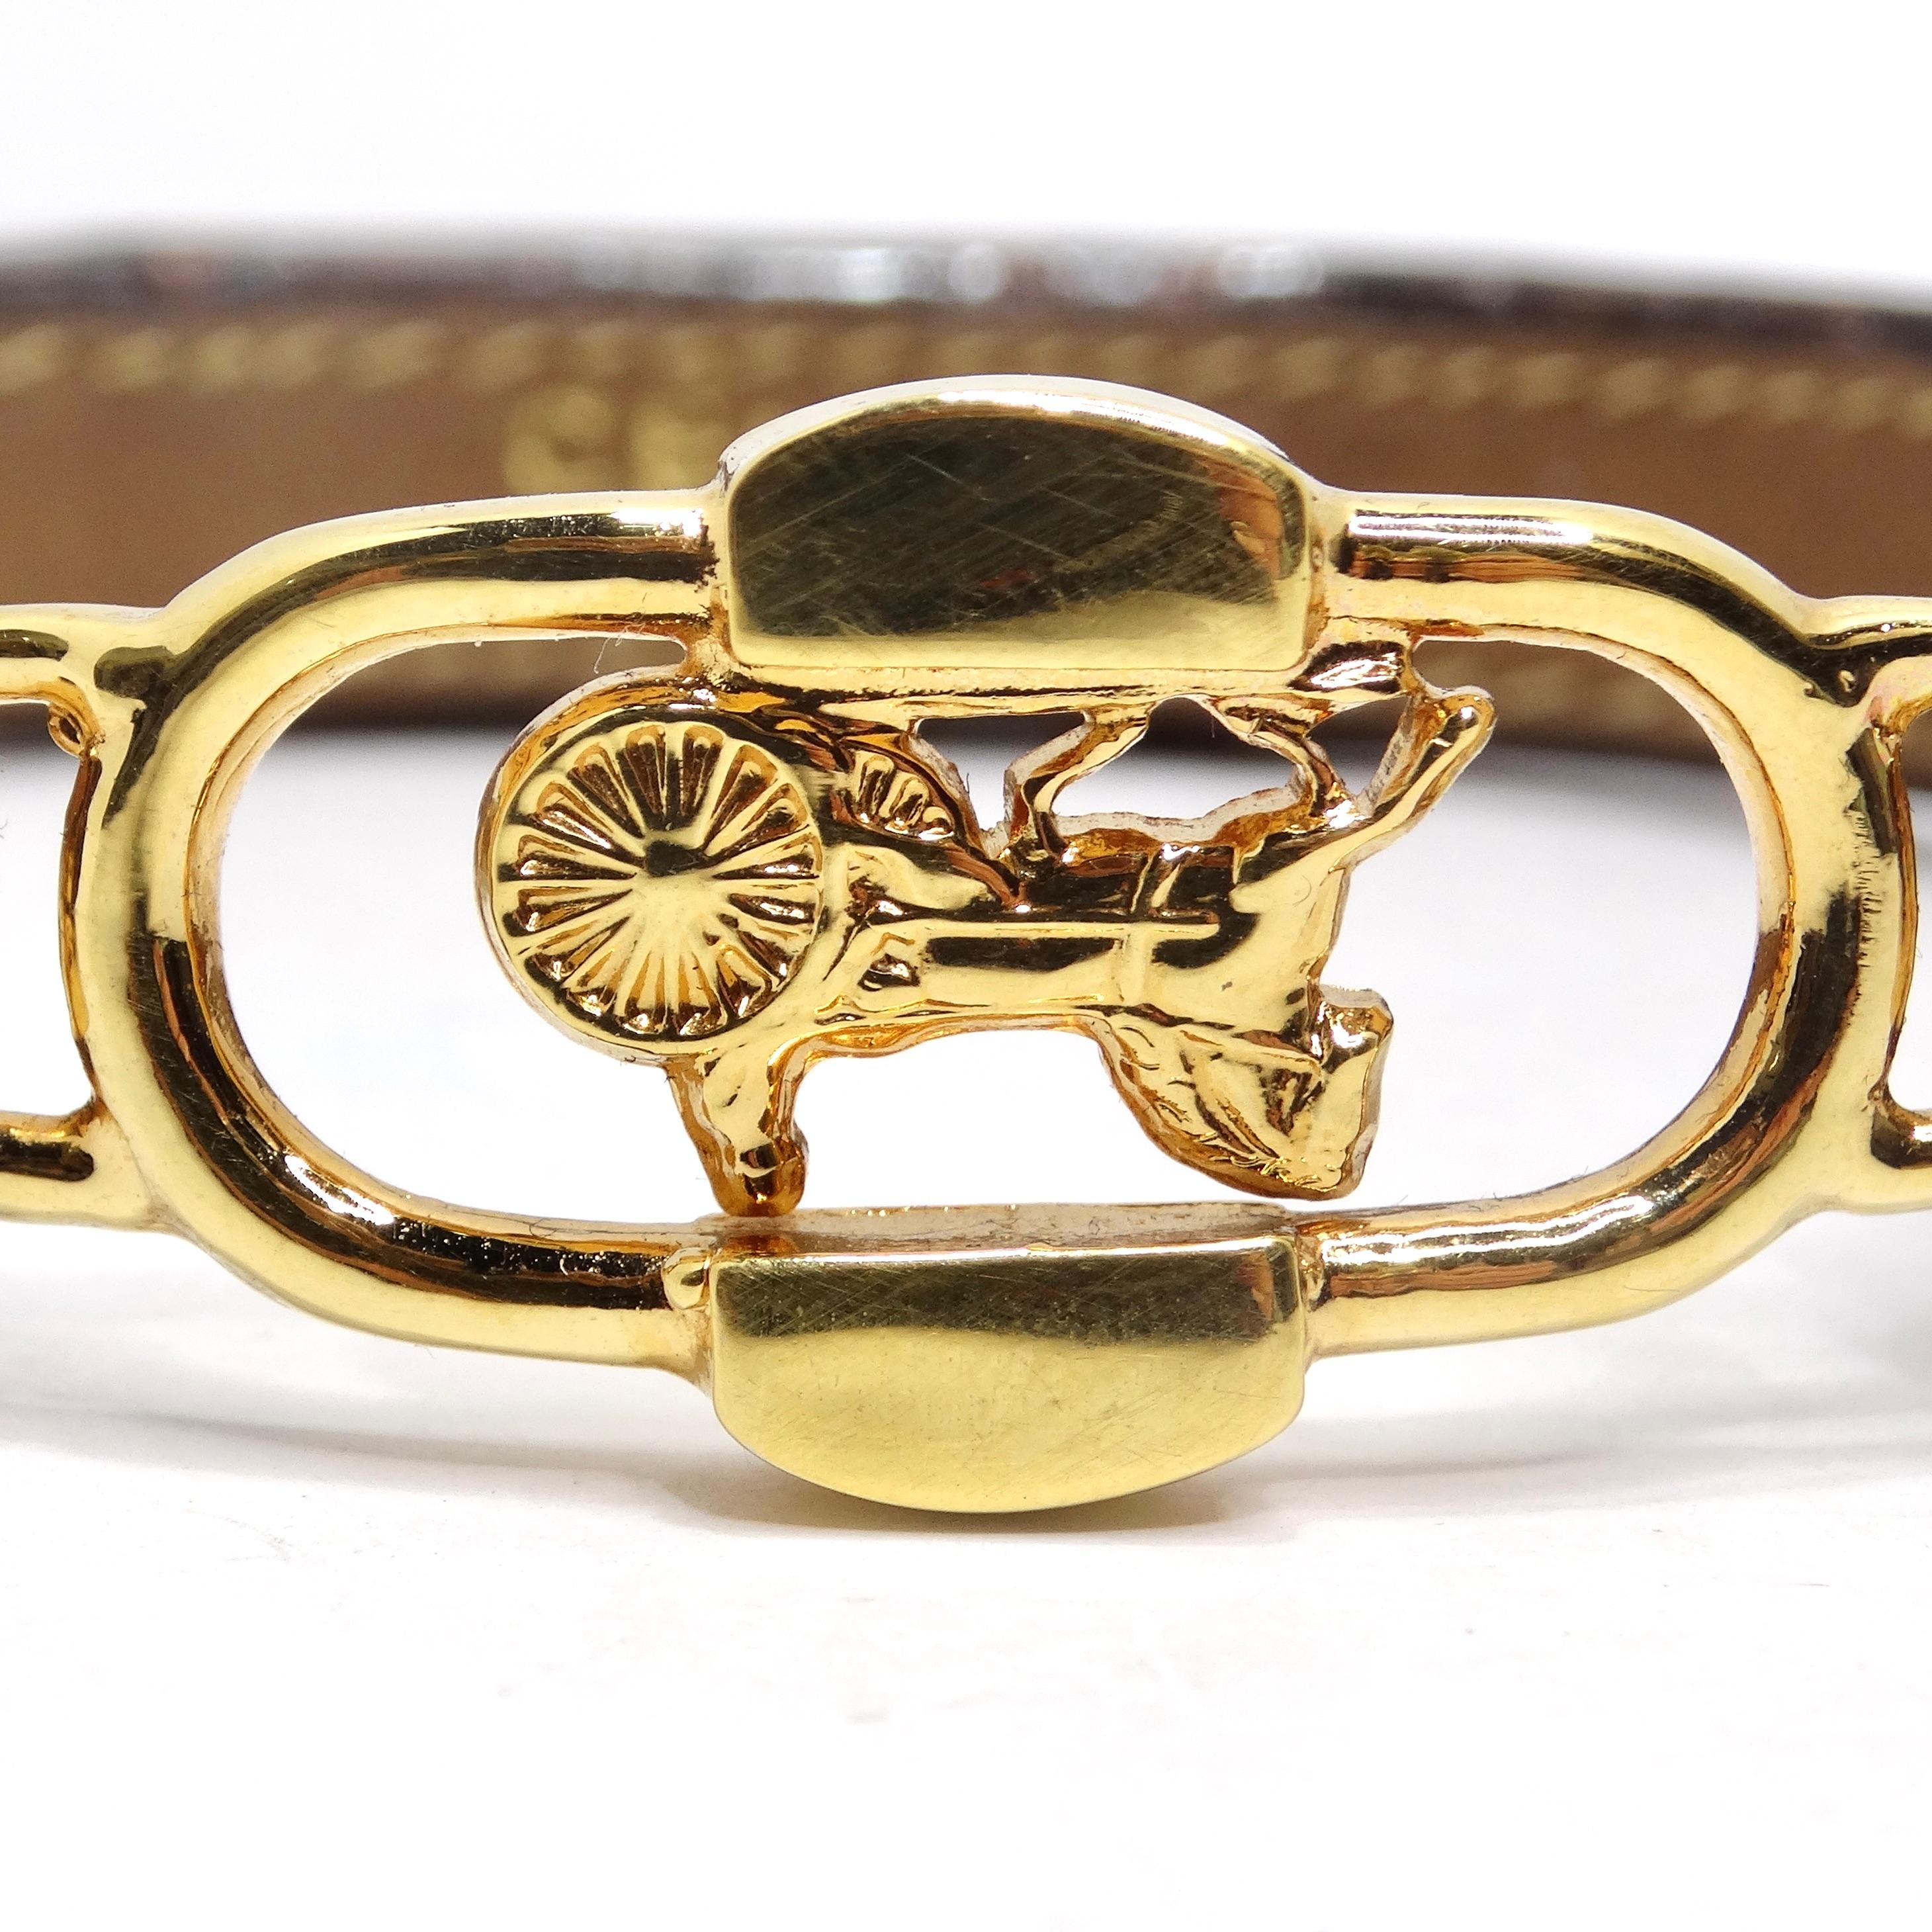 Indulge in equestrian elegance with the Celine 1990s Gold Tone Horse Emblem Leather Bracelet. This brown leather bracelet features a distinctive yellow gold tone horse emblem at the center, creating a super chic and unique accessory with a timeless